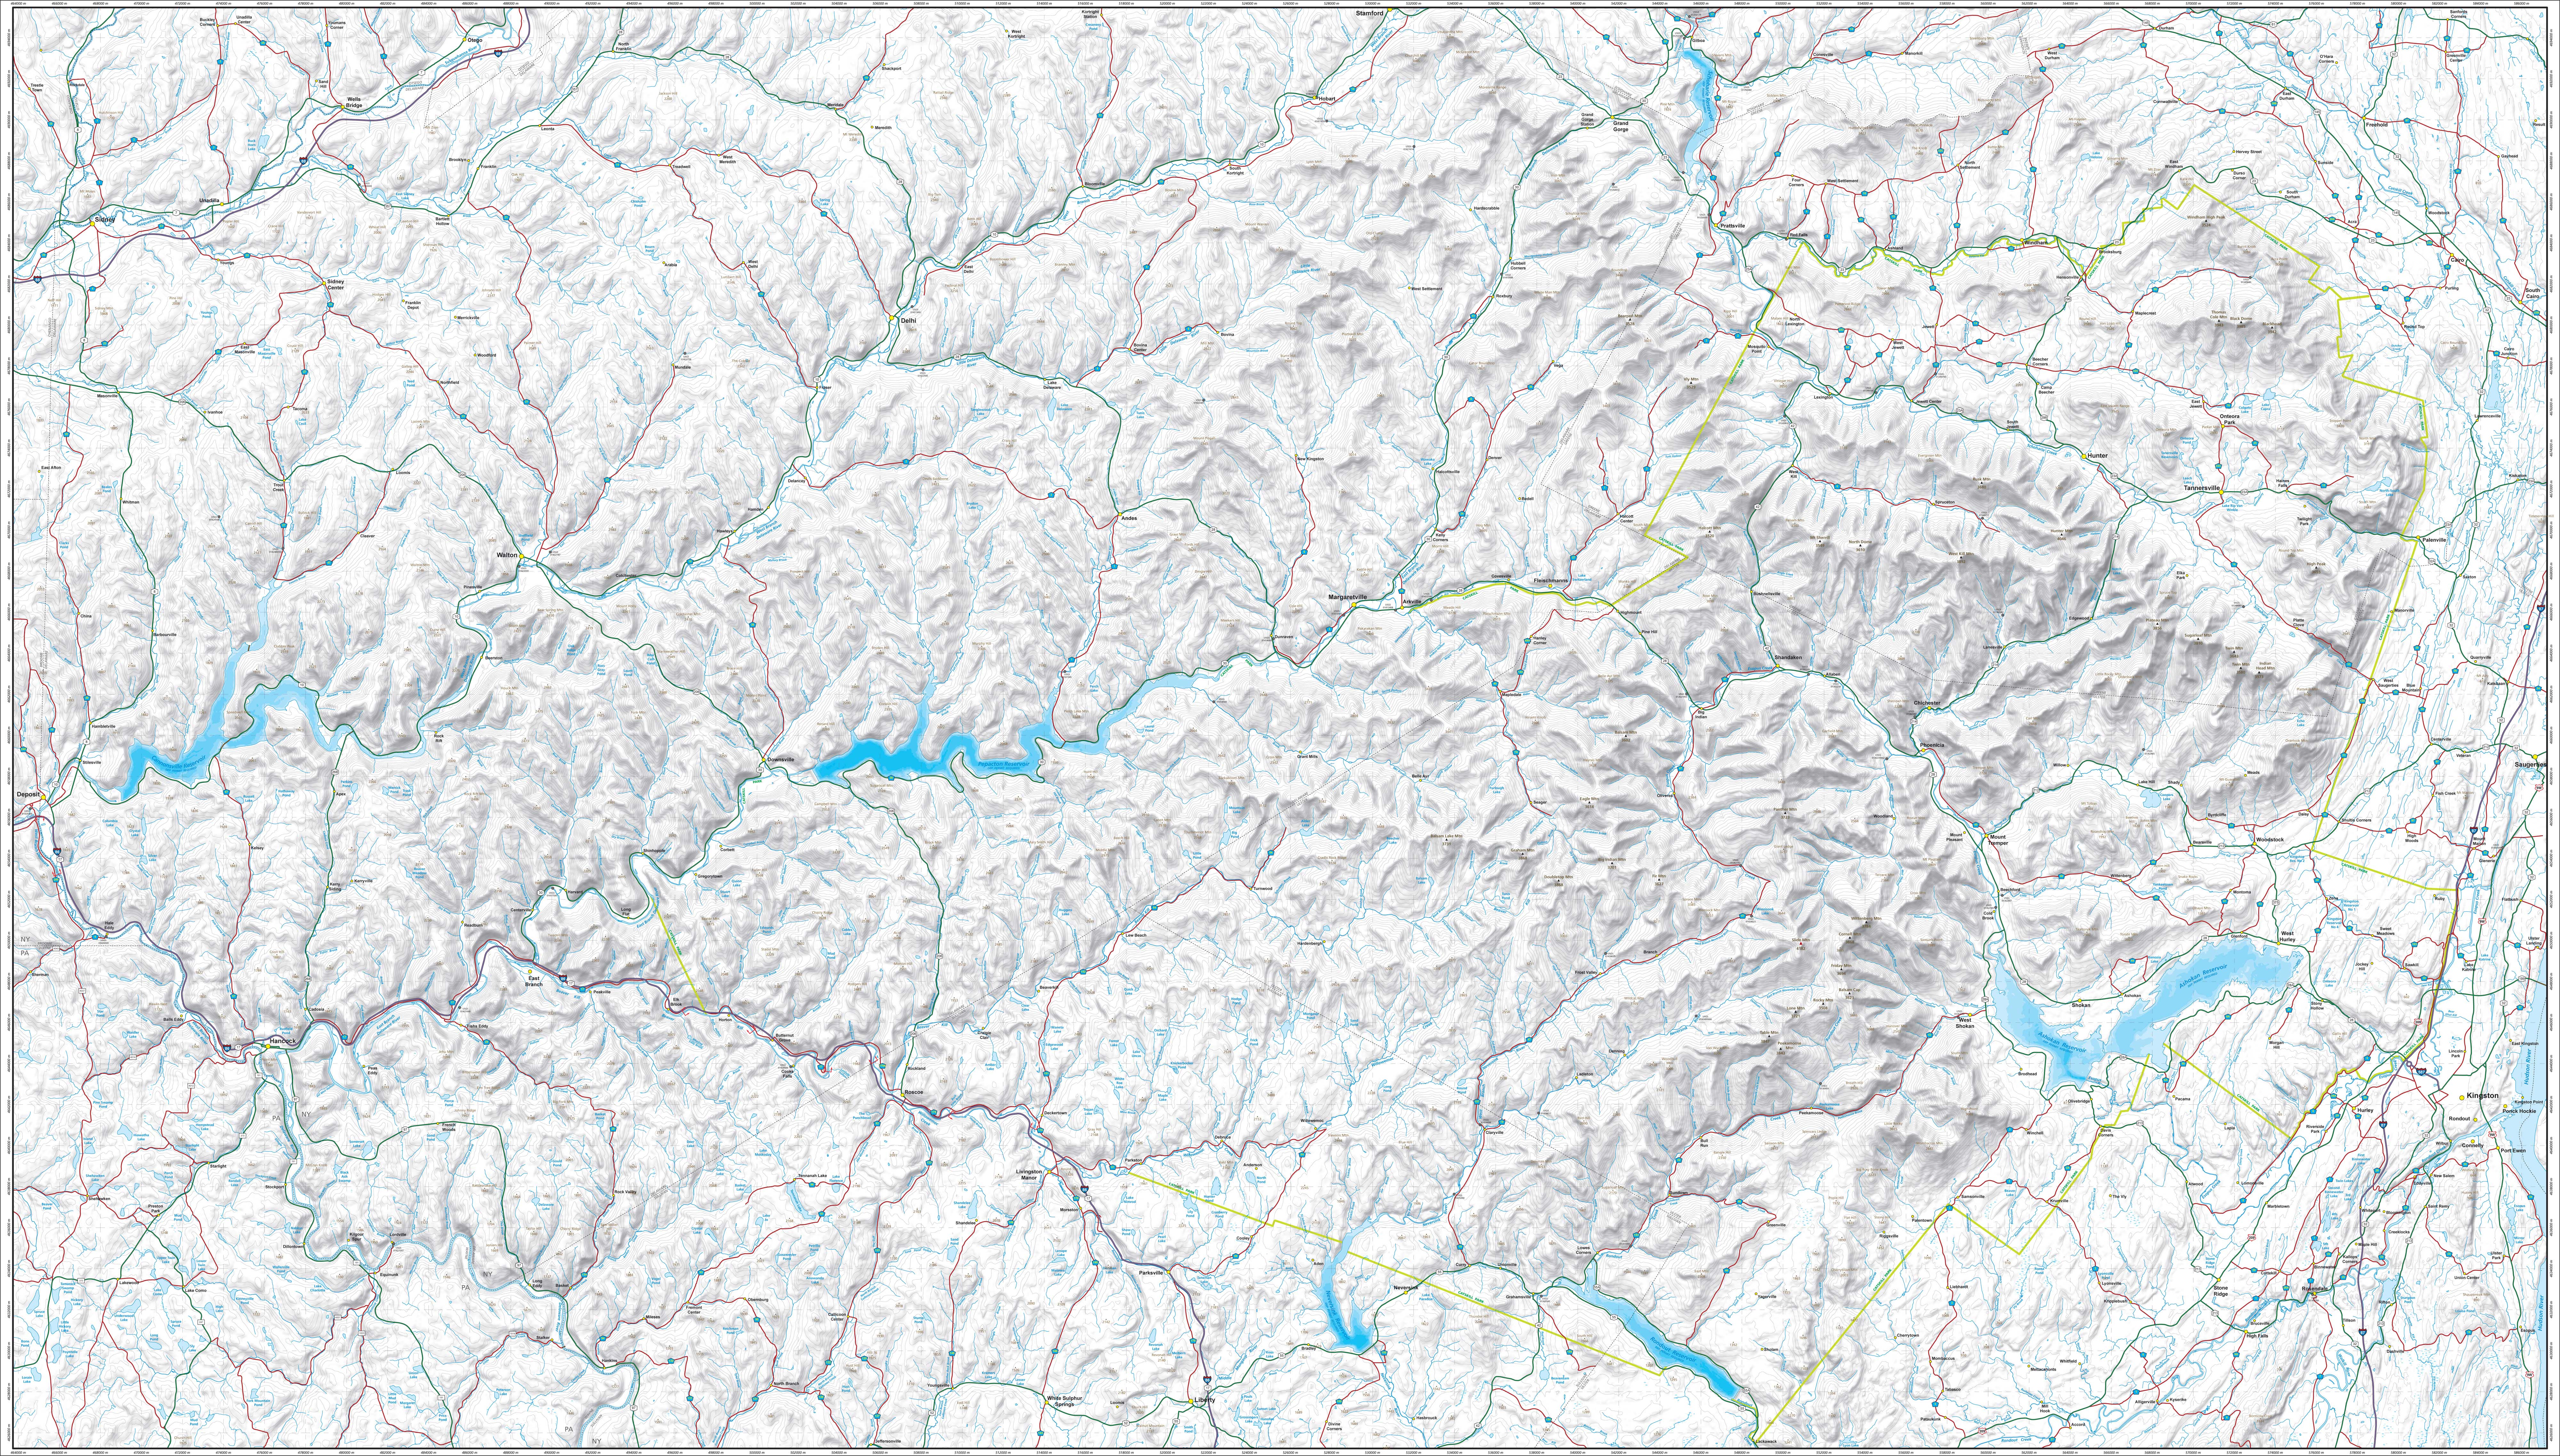 topo map of the catskill mountains